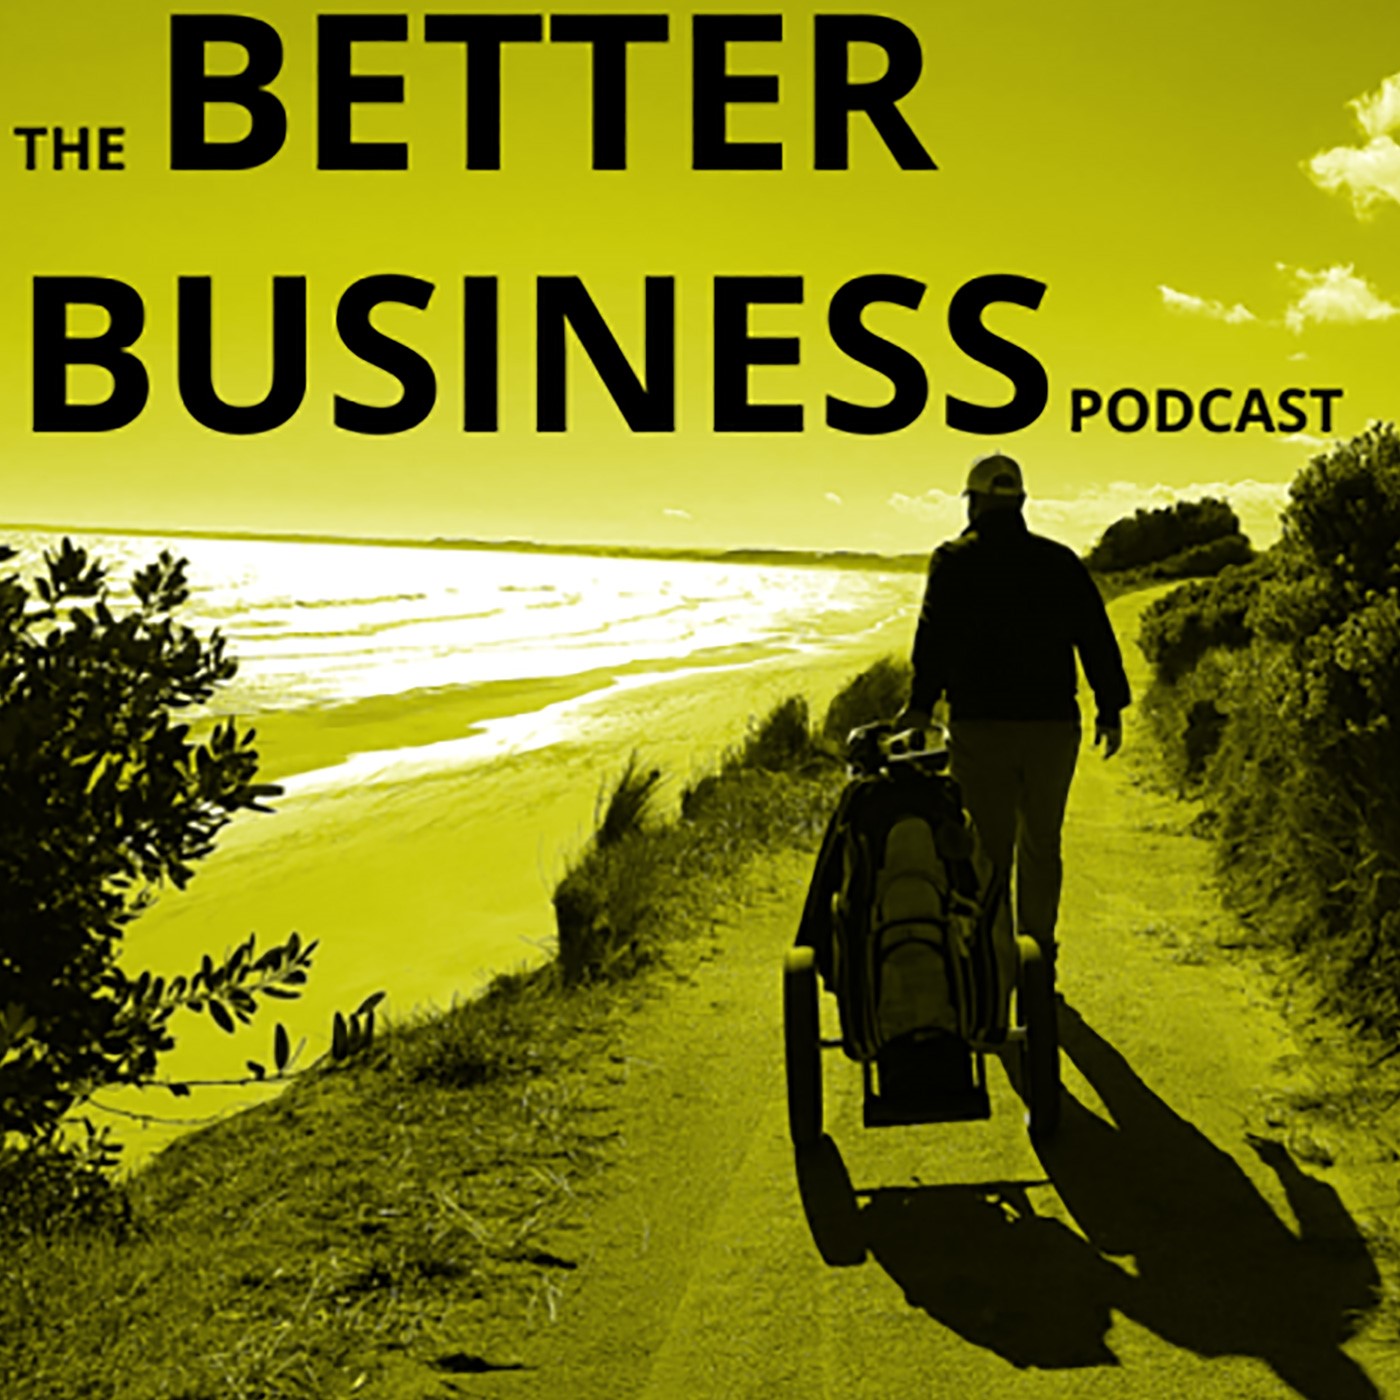 The Better Business Podcast